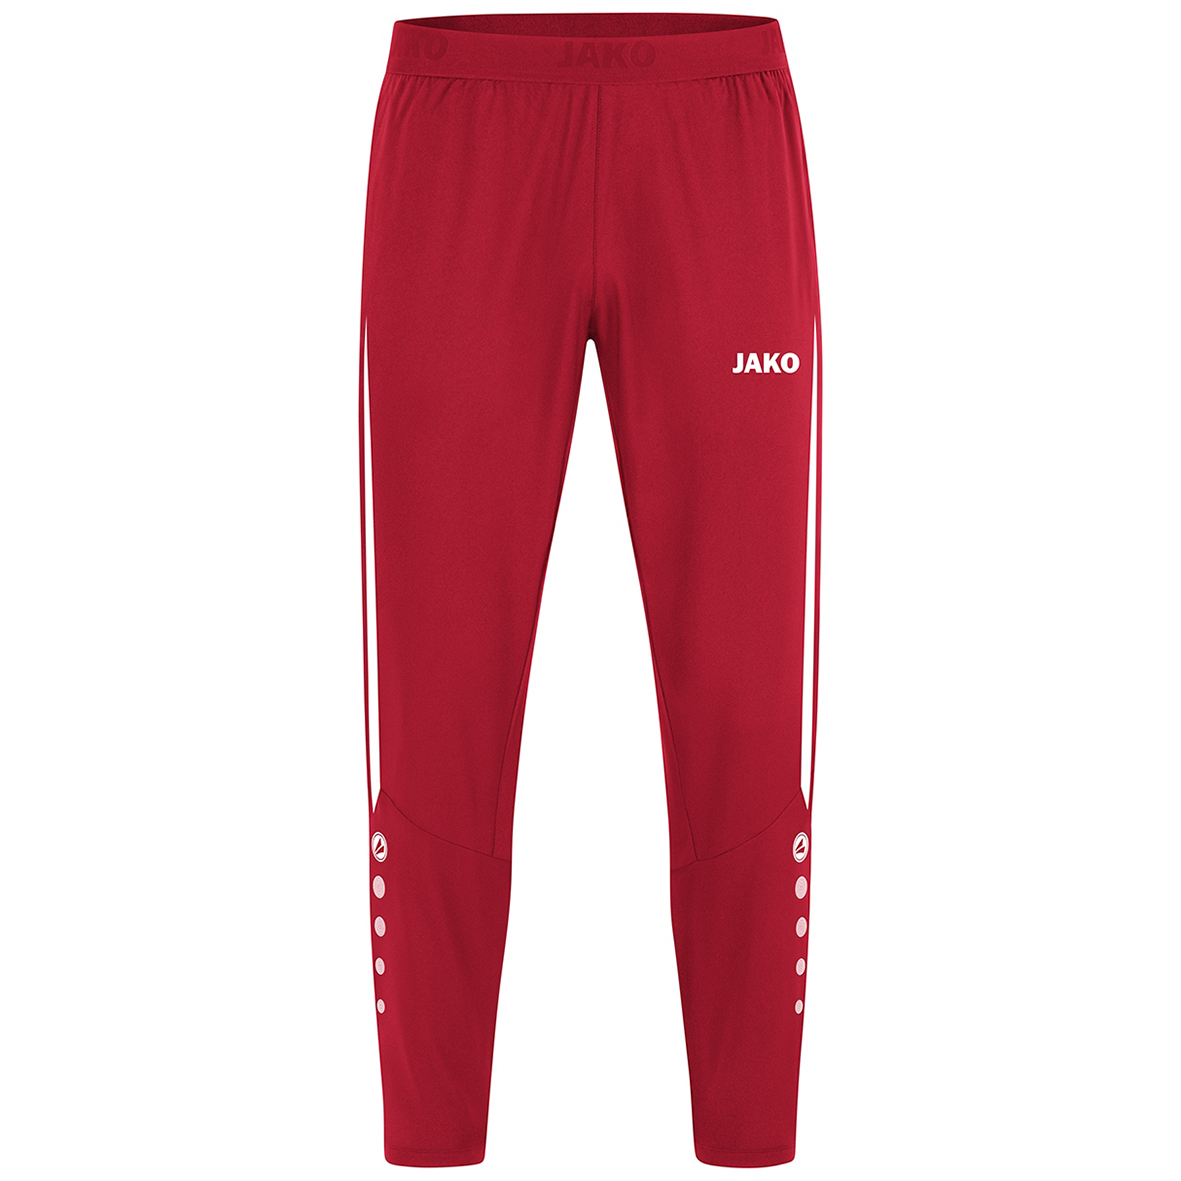 JAKO POWER LEISURE TROUSERS, RED-WHITE MEN.